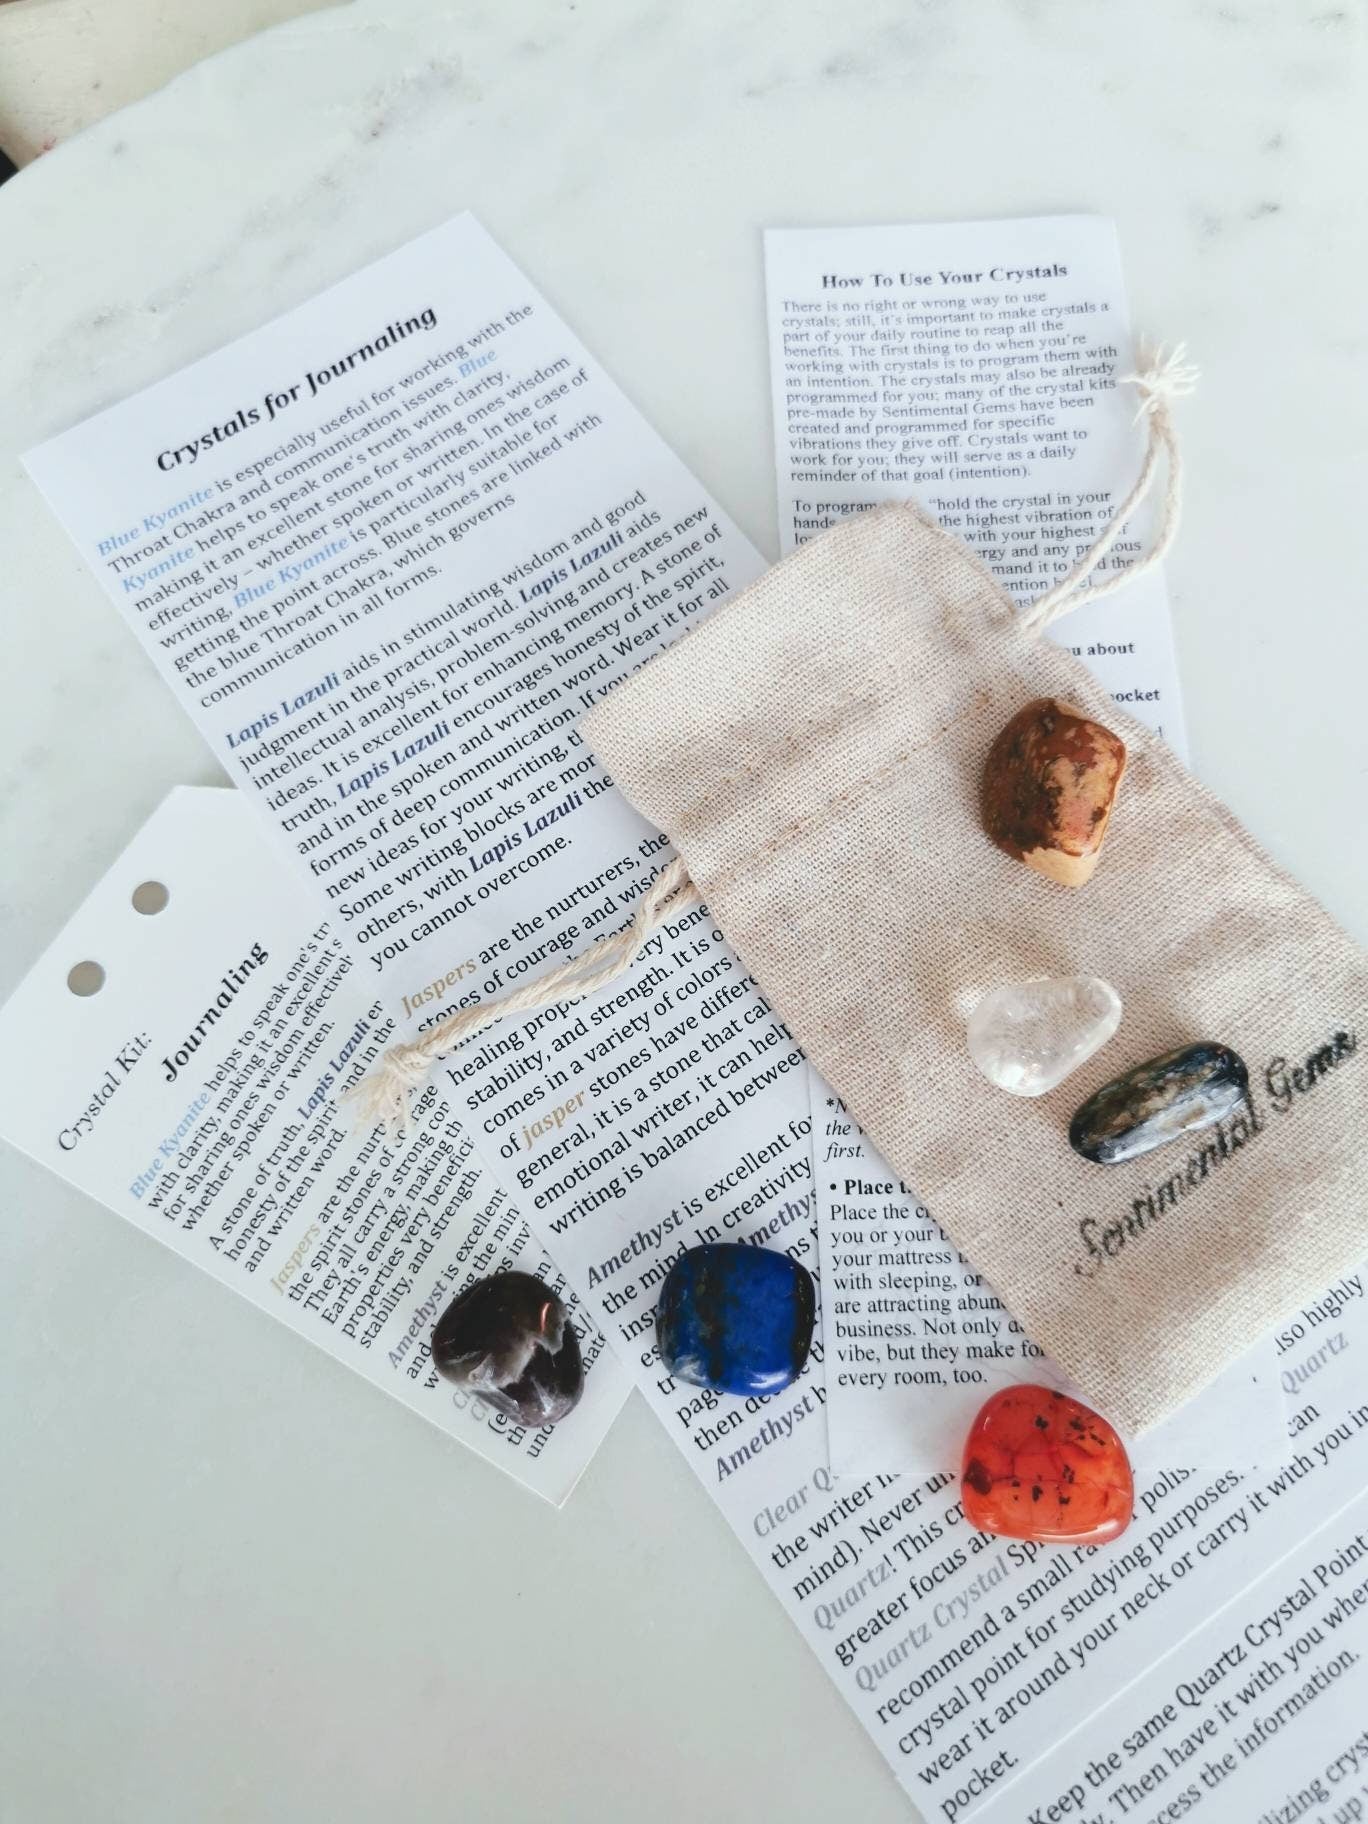 Intention-Infused Journaling Crystals Set